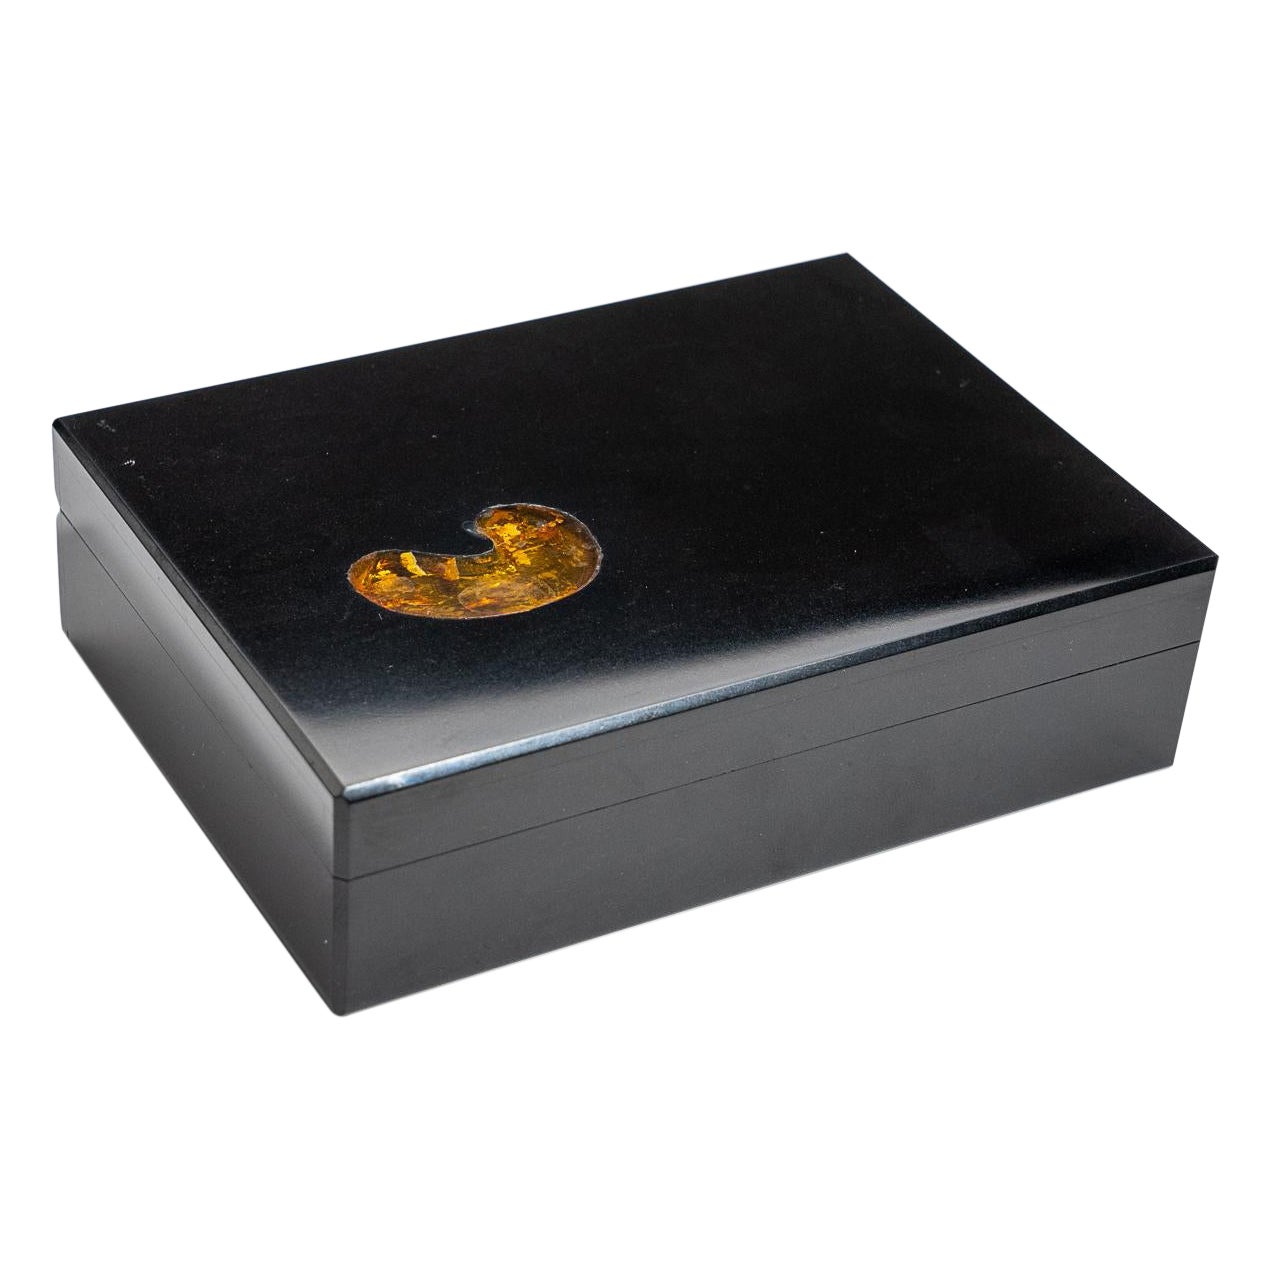 Genuine Black Onyx with Amber Jewelry Box (1.25" in Height, 1.5 lbs.)